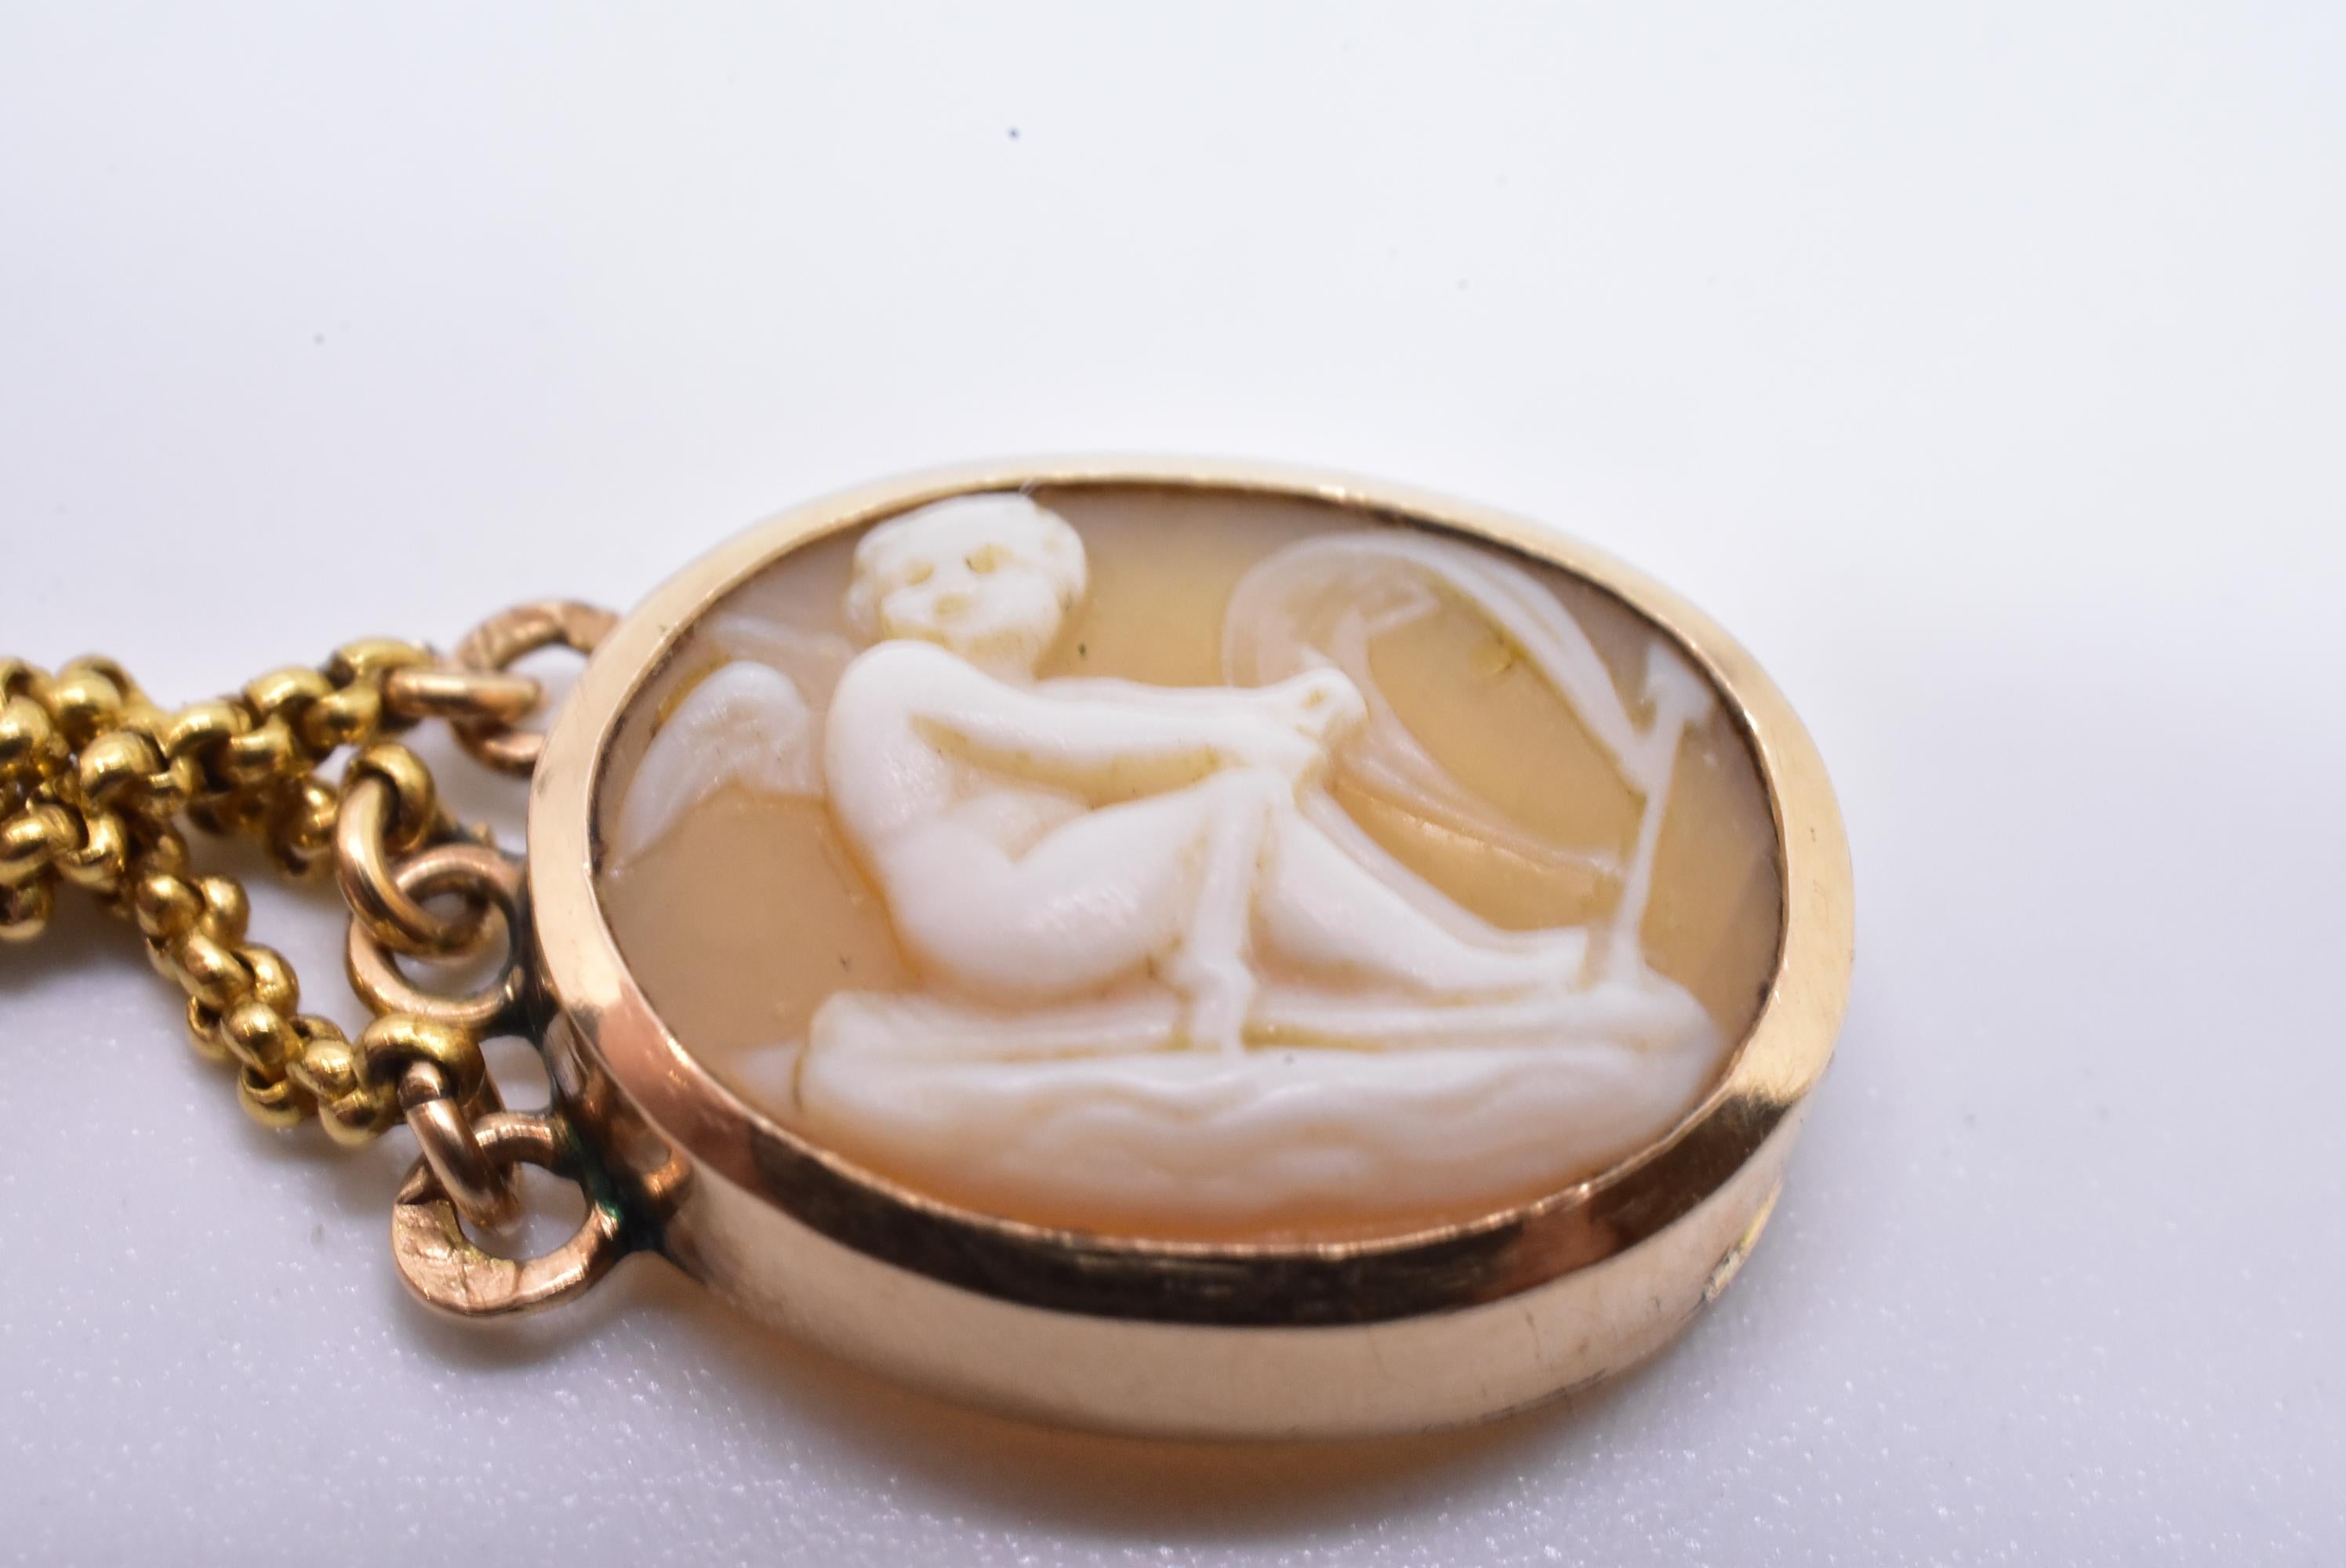 Shell Cameo Swag Necklace with Scenes of Cupid (Eros), circa 1820 11